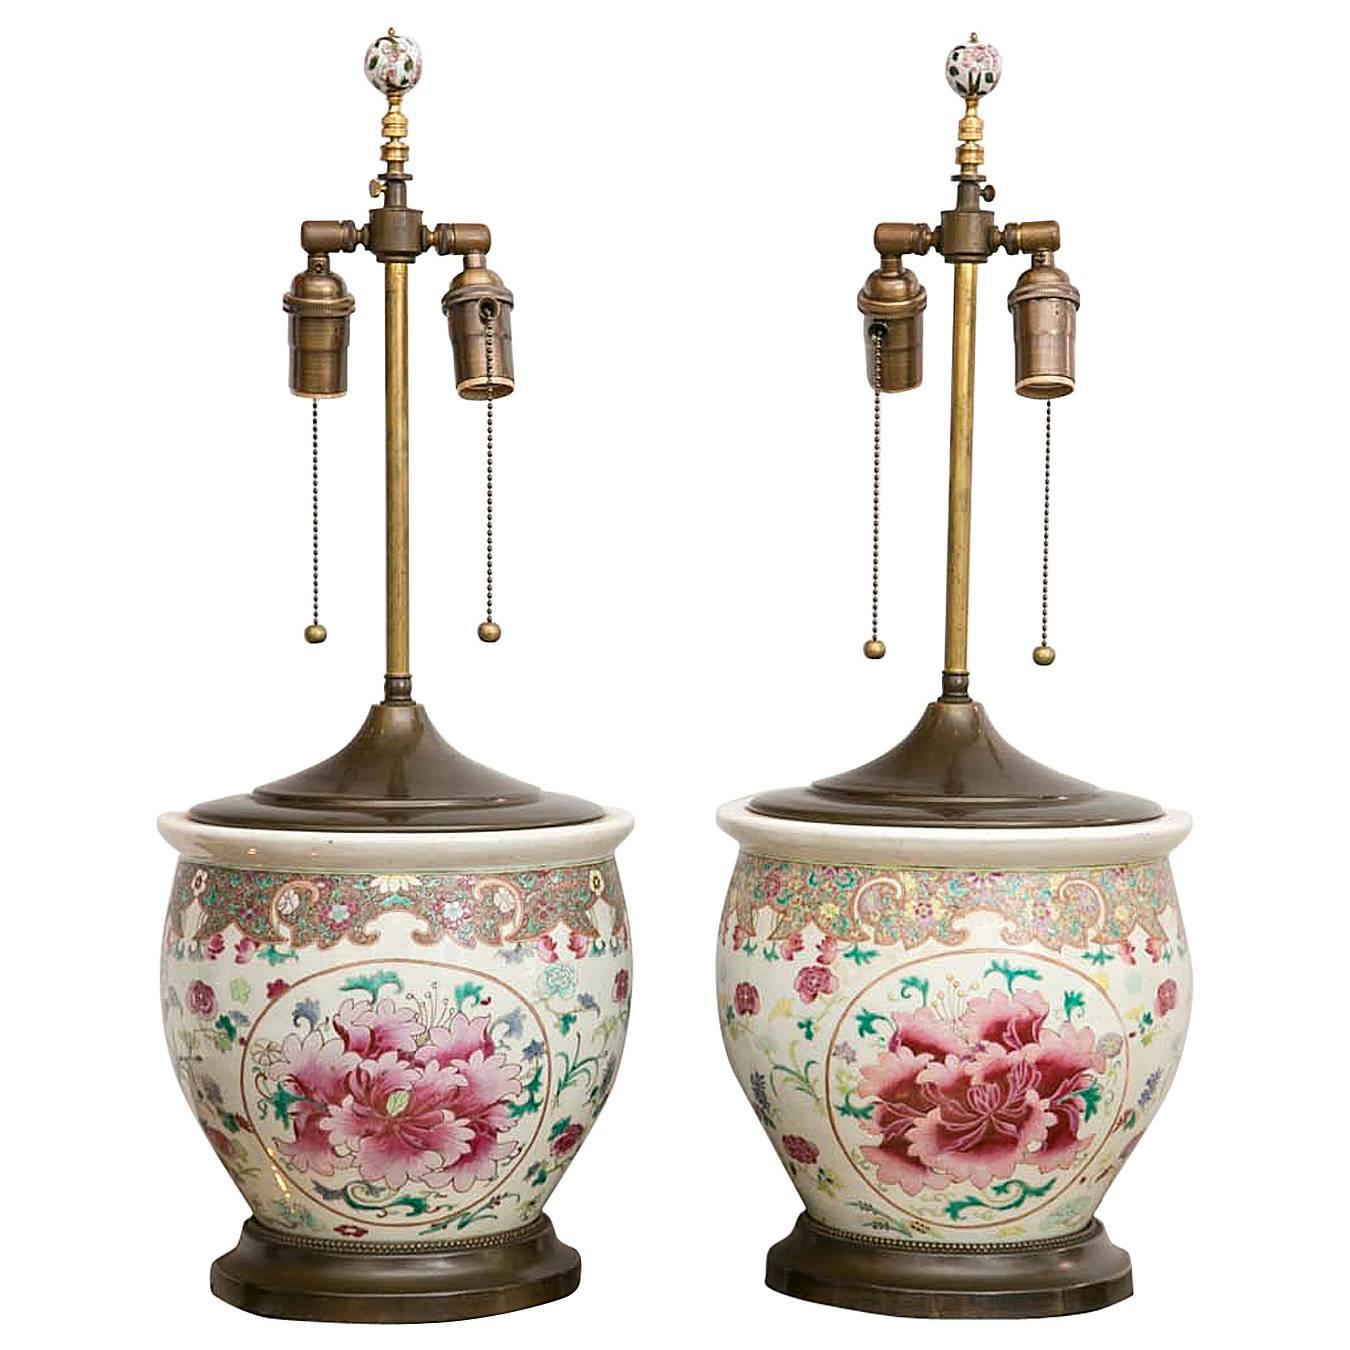 Pair of Early 20th Century Chinese Export Peony Design Table Lamps